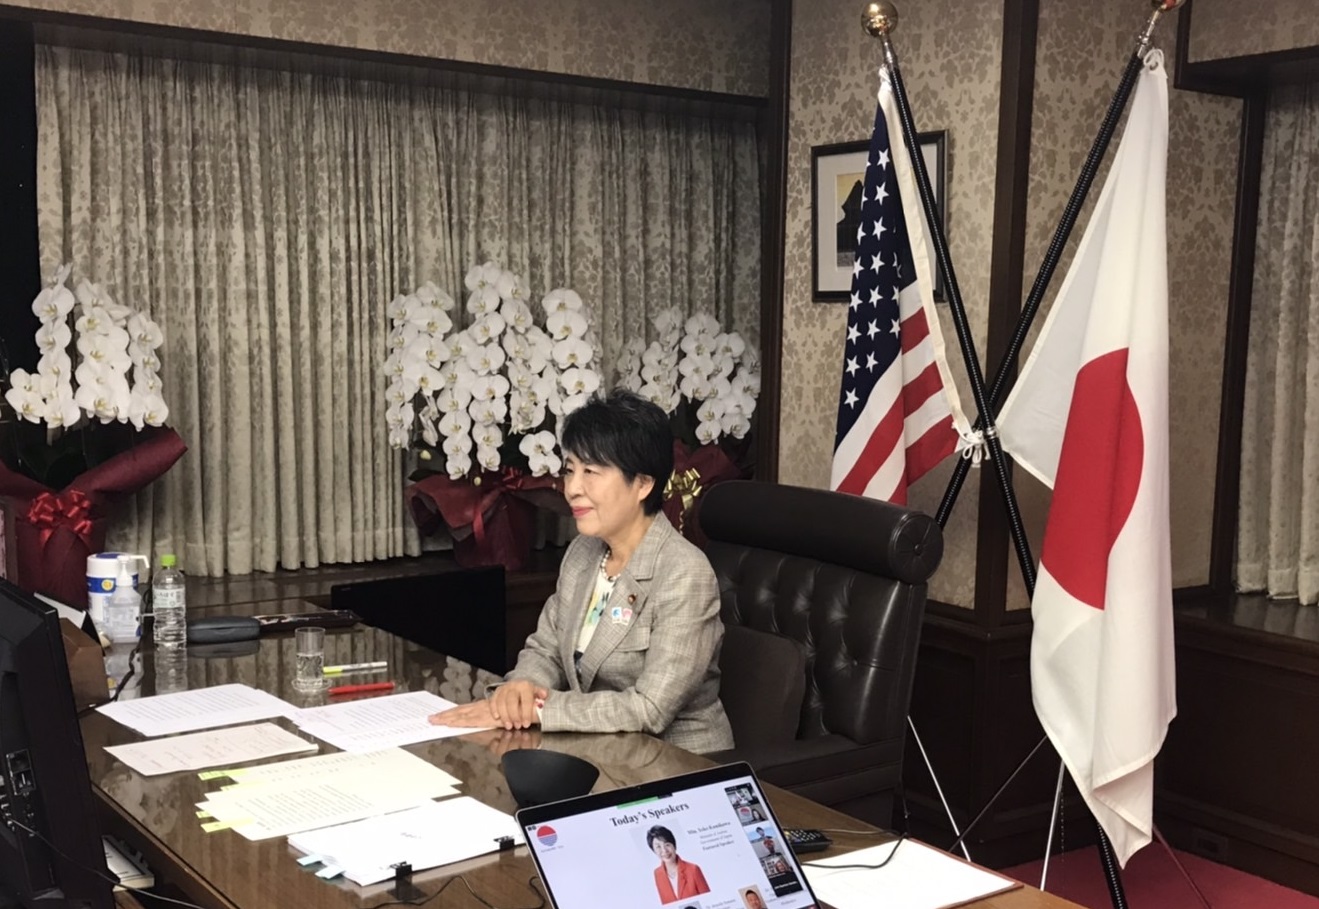 October 8, 2020 Justice Minister delivers a speech at an online seminar in the United States